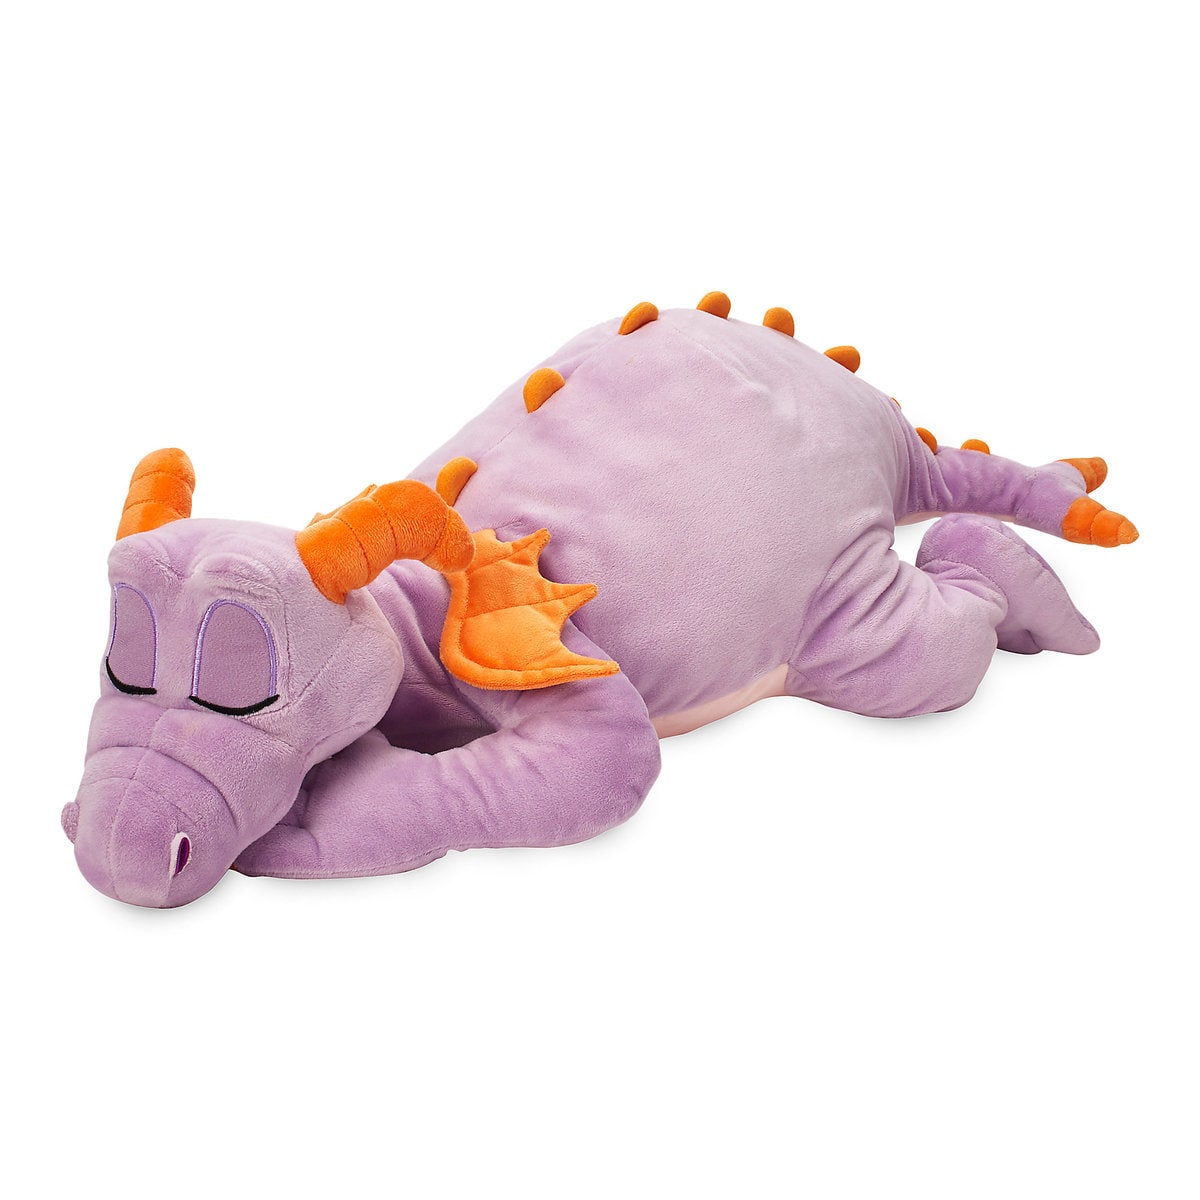 Figment Dream Friend Plush Is Cuter Than We Could Ever Imagine